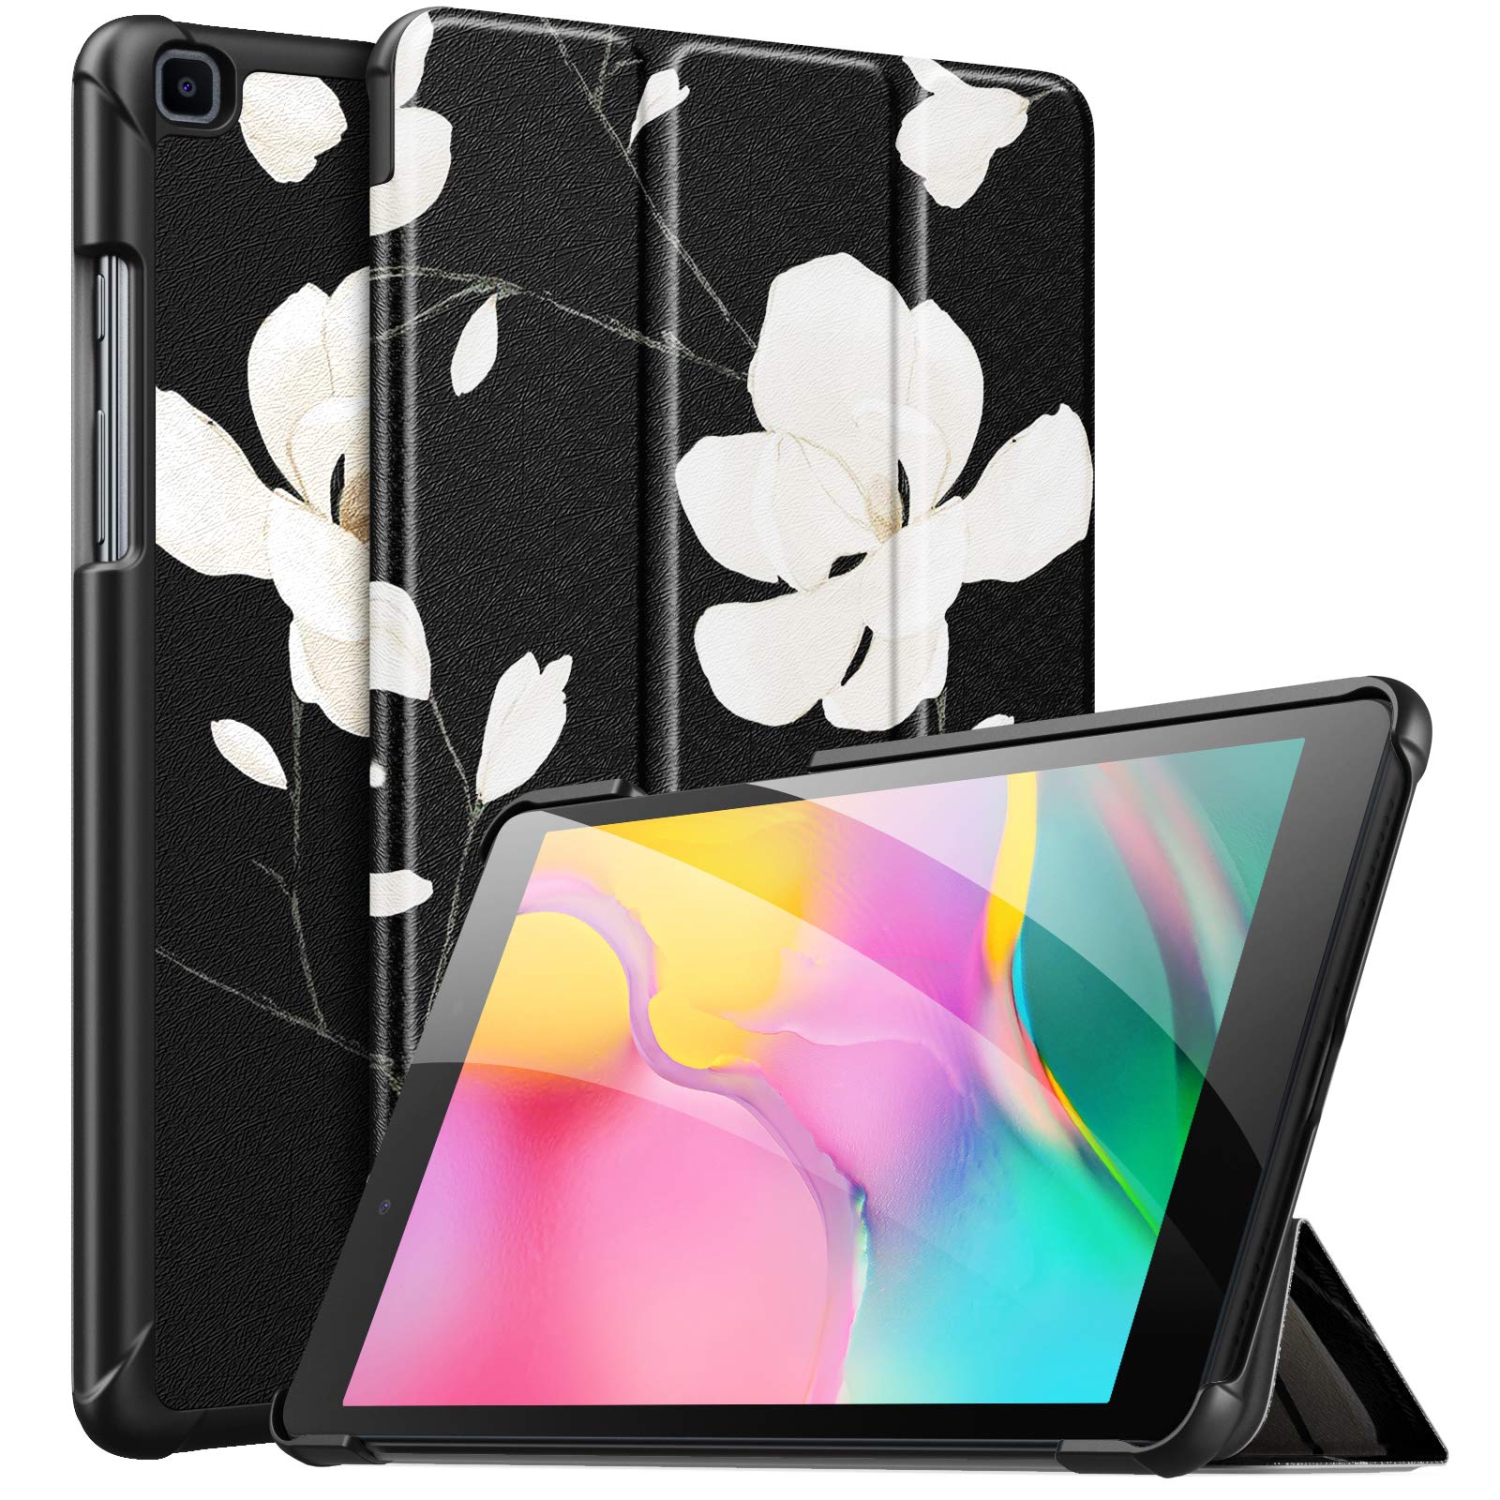 MoKo Case Fit Samsung Galaxy Tab A 8.0 T290/T295 2019 Without S Pen Model, Ultra Lightweight Slim-Shell Stand Folio Cover Case for Galaxy Tab A 8.0 2019 Release Tablet